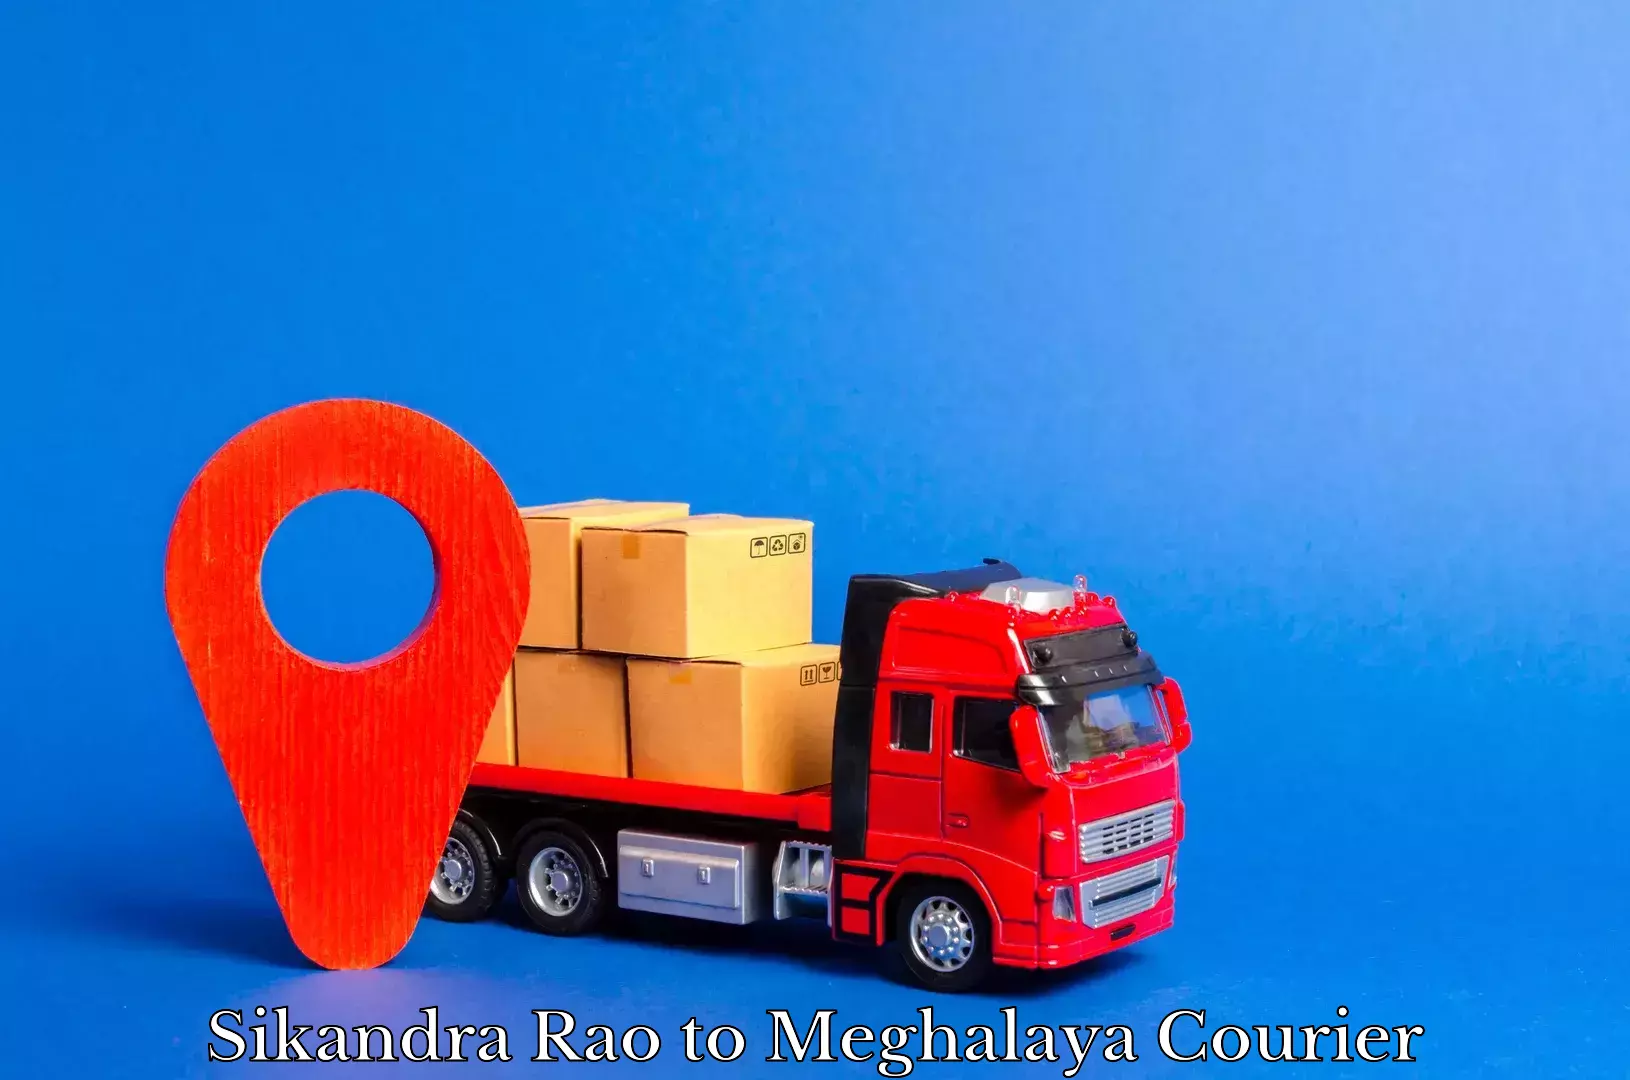 Residential courier service Sikandra Rao to Meghalaya